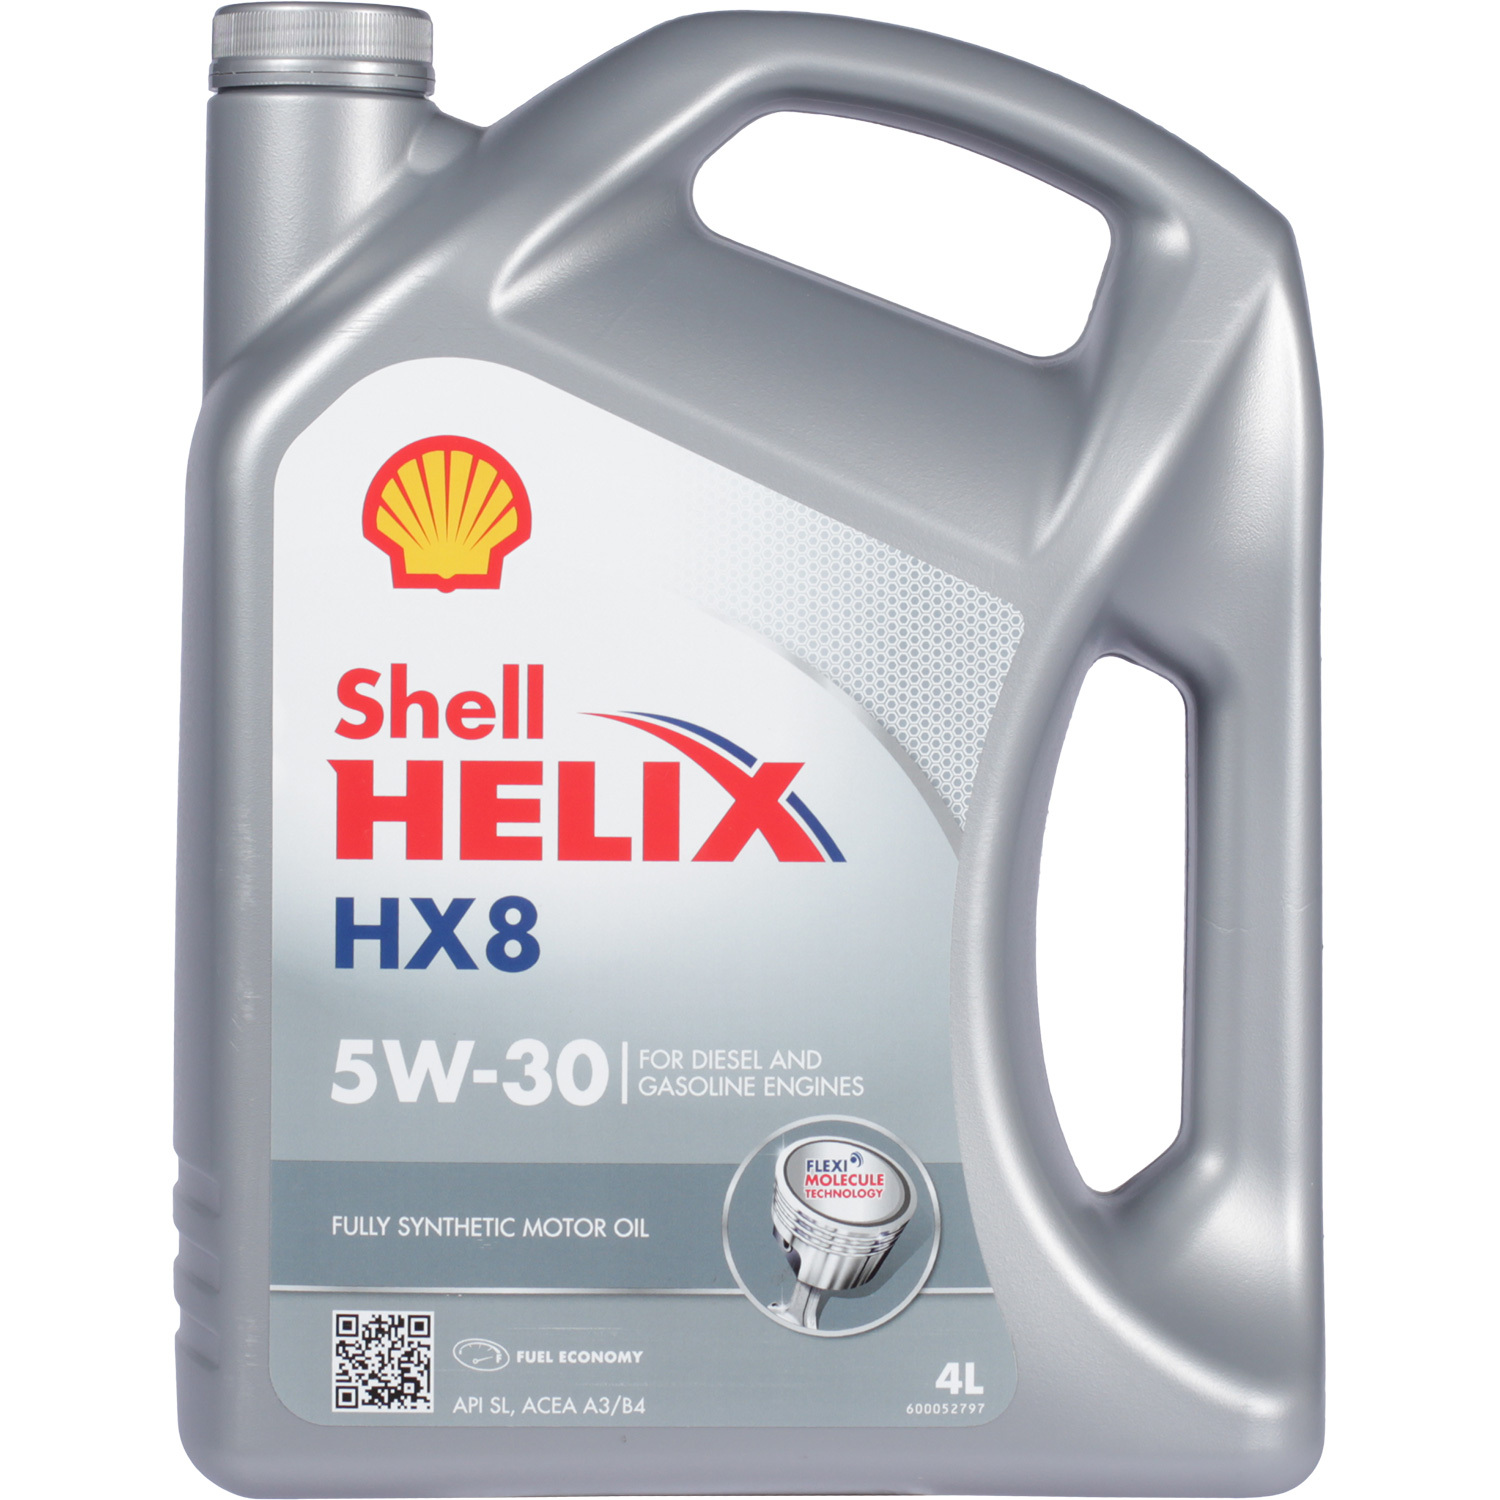 Shell Моторное масло Shell Helix HX8 5W-30, 4 л